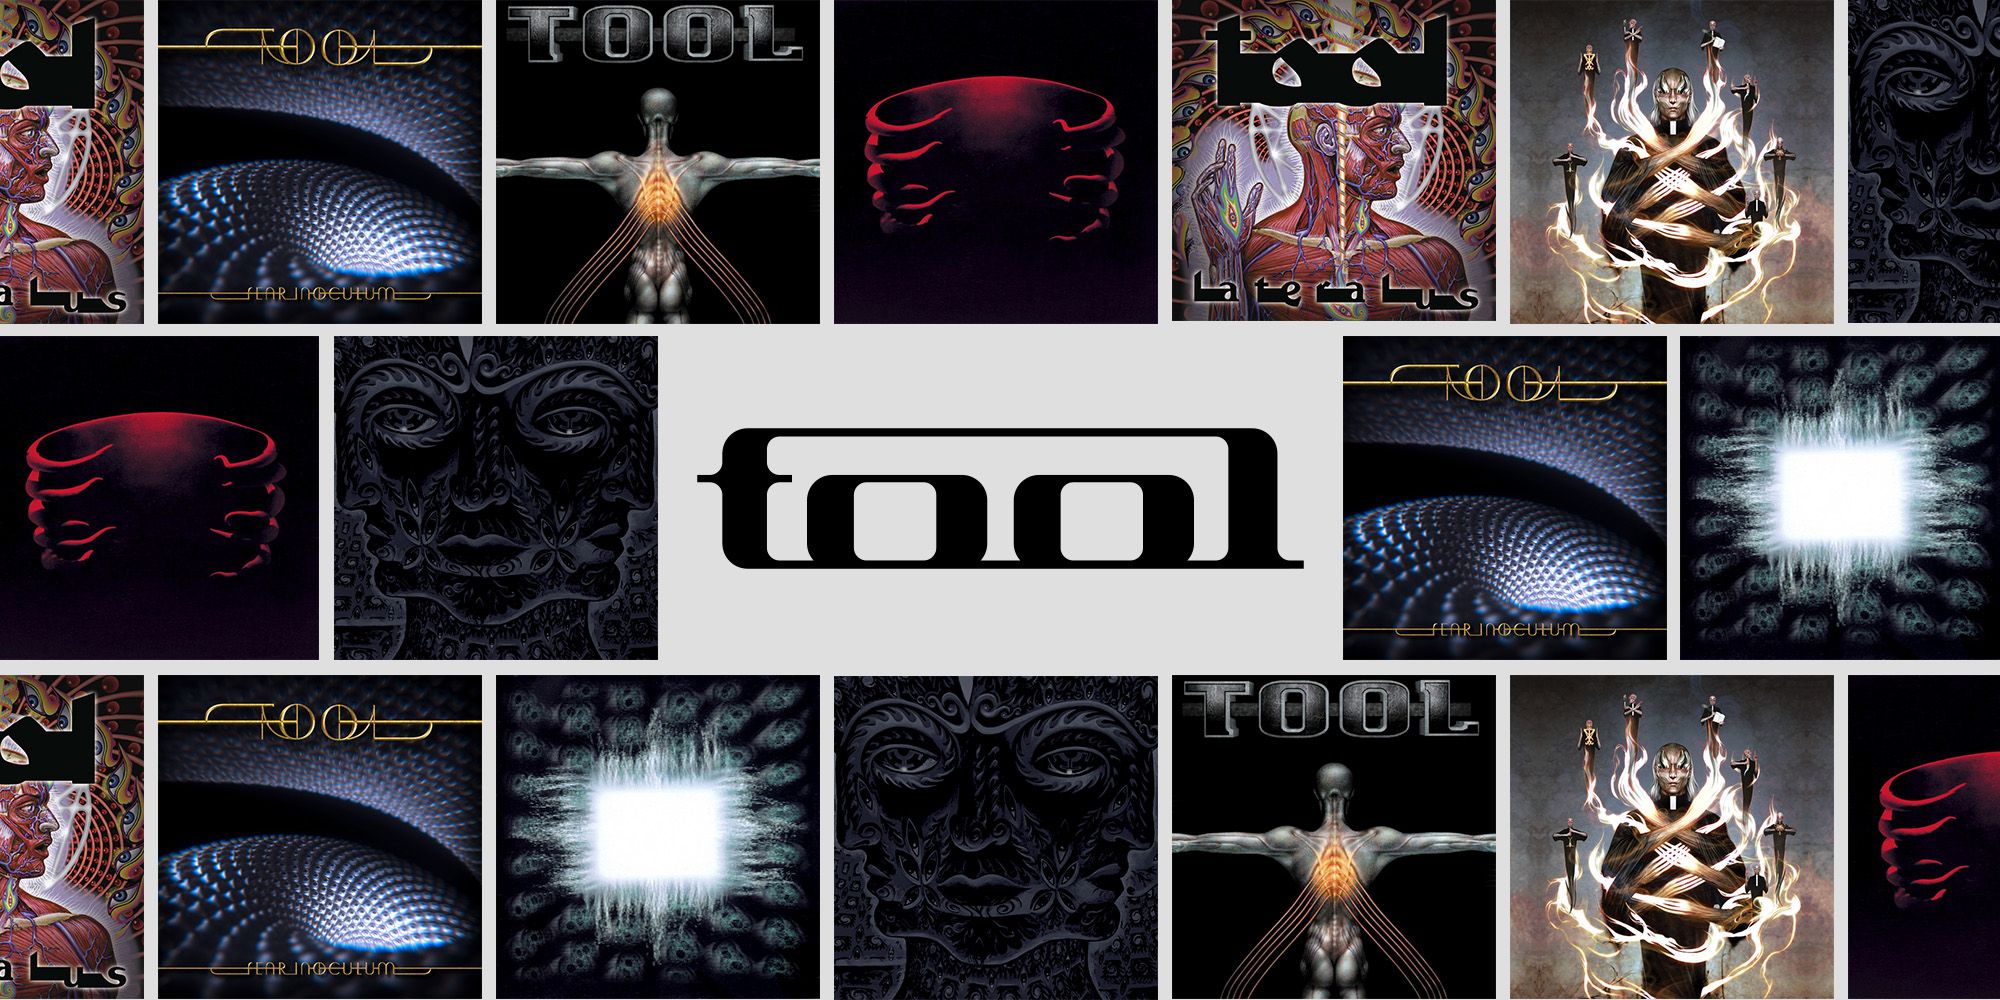 tool aenima album part talking about we are only an imgination of ourselves